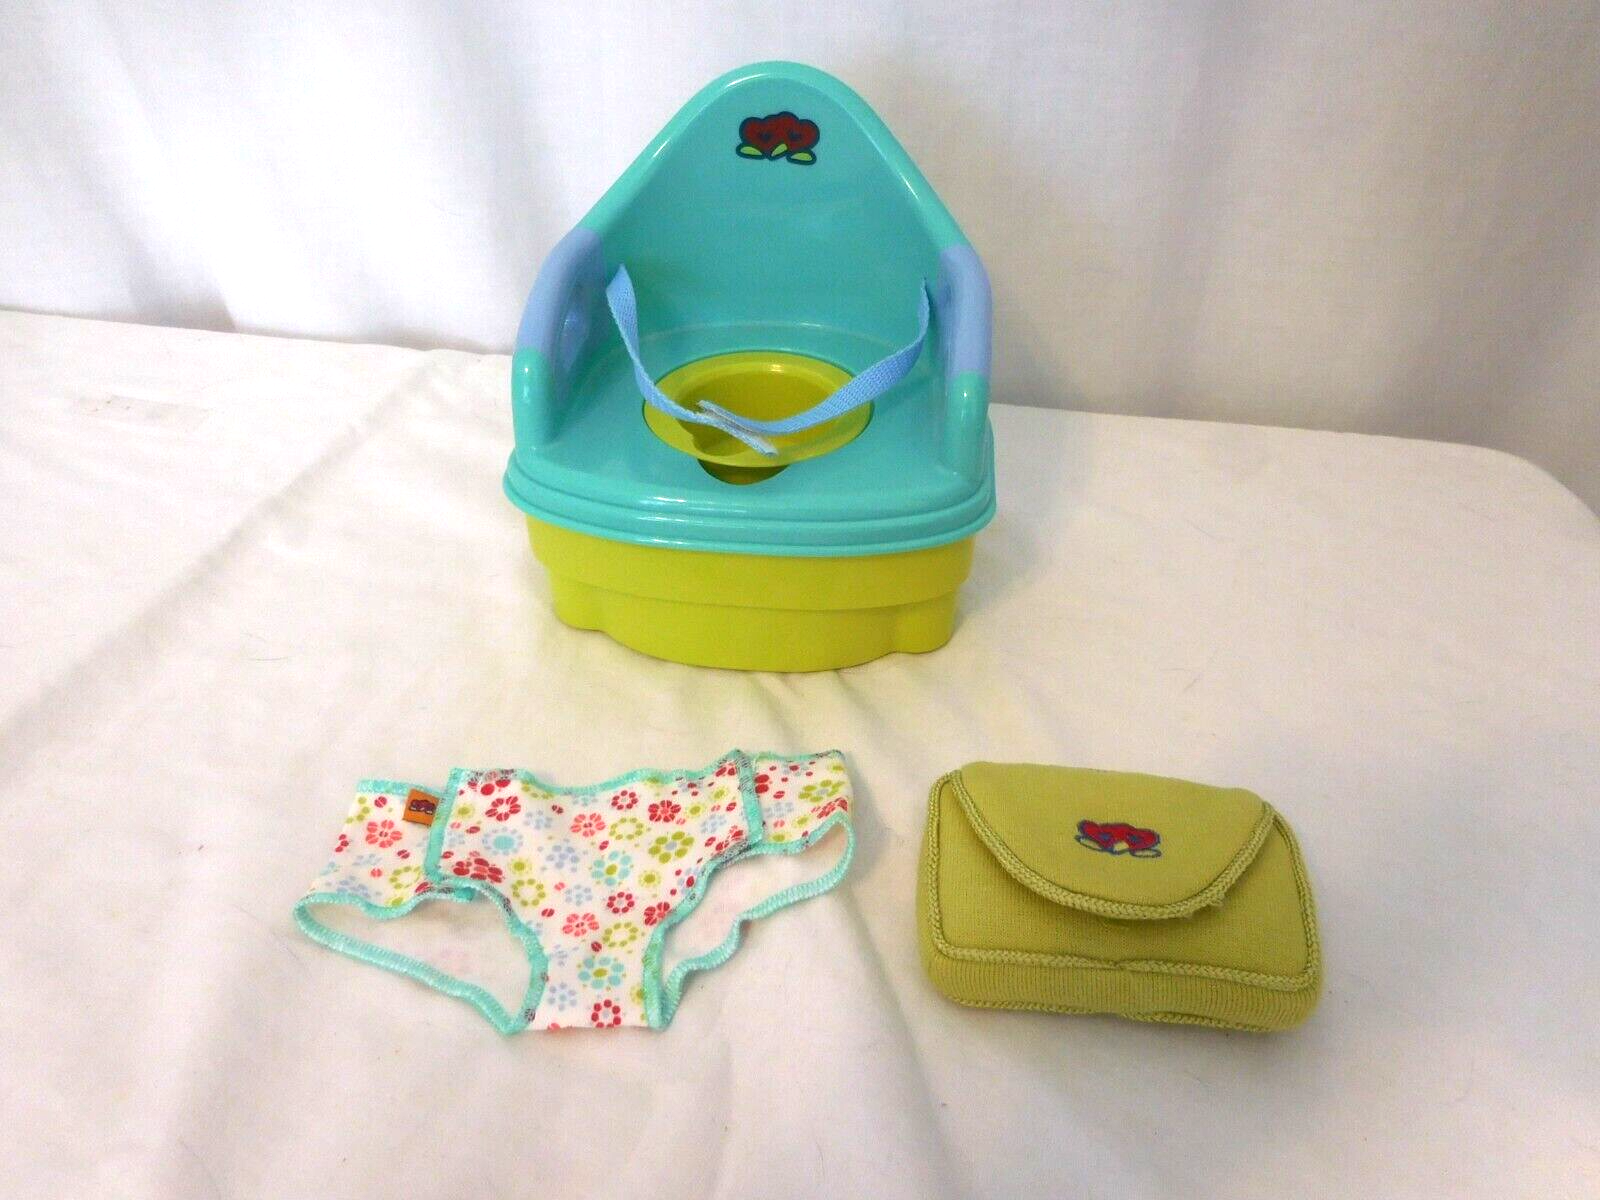 American Girl Doll Bitty Baby Twins Potty Seat & Potty Training Accessories Rare - $44.55